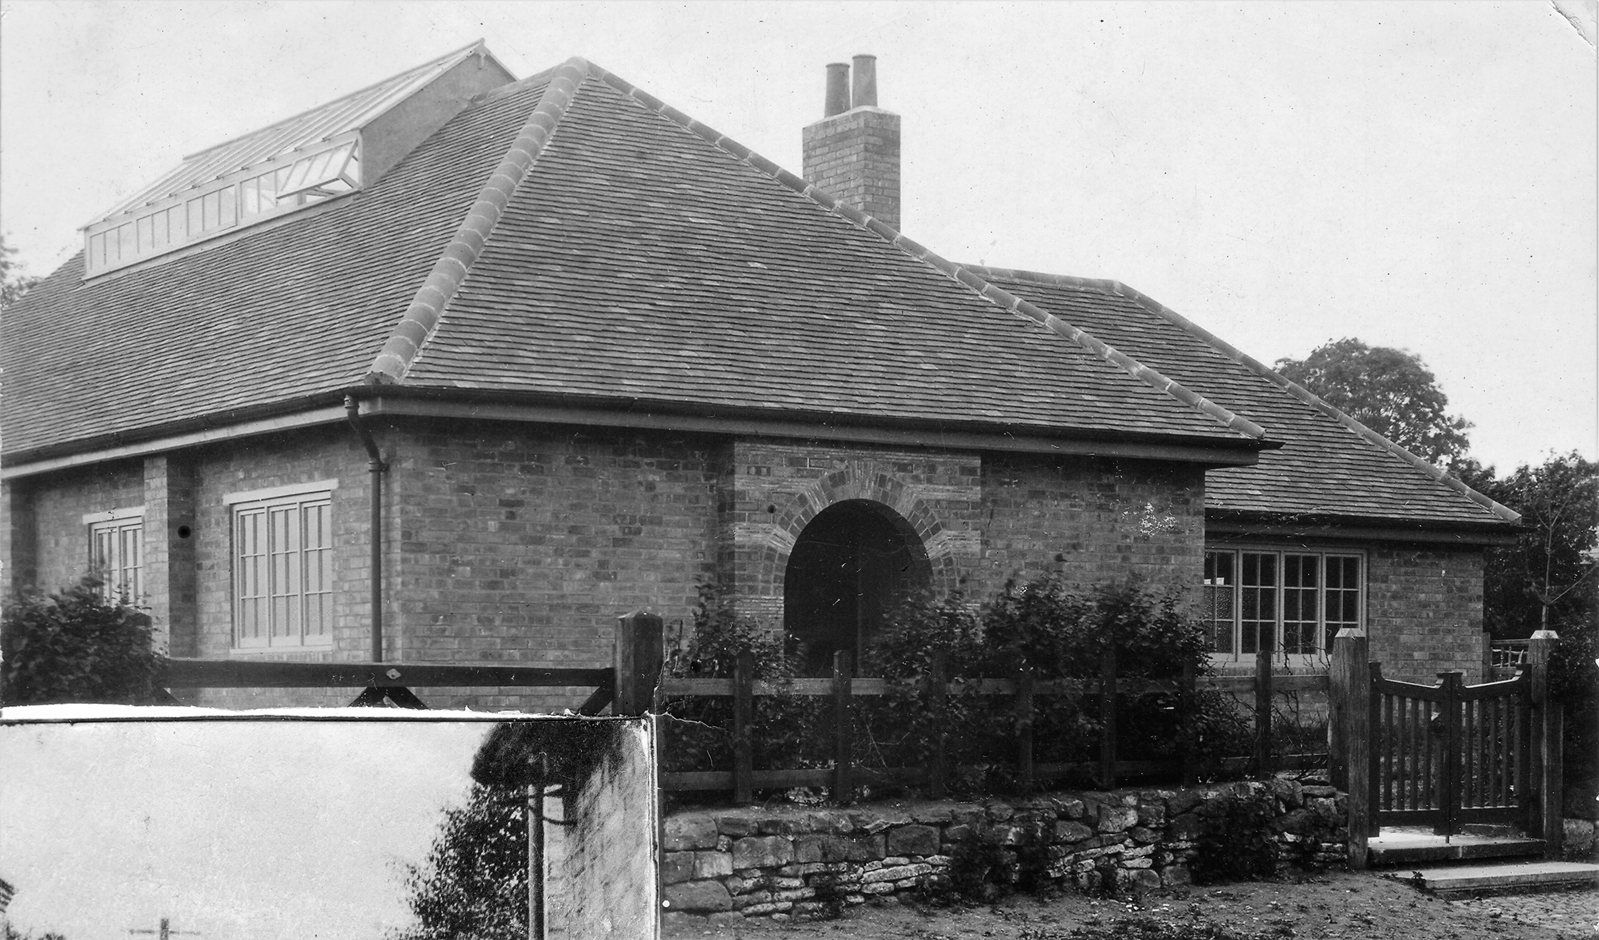 The Village Hall shortly after opening in 1921